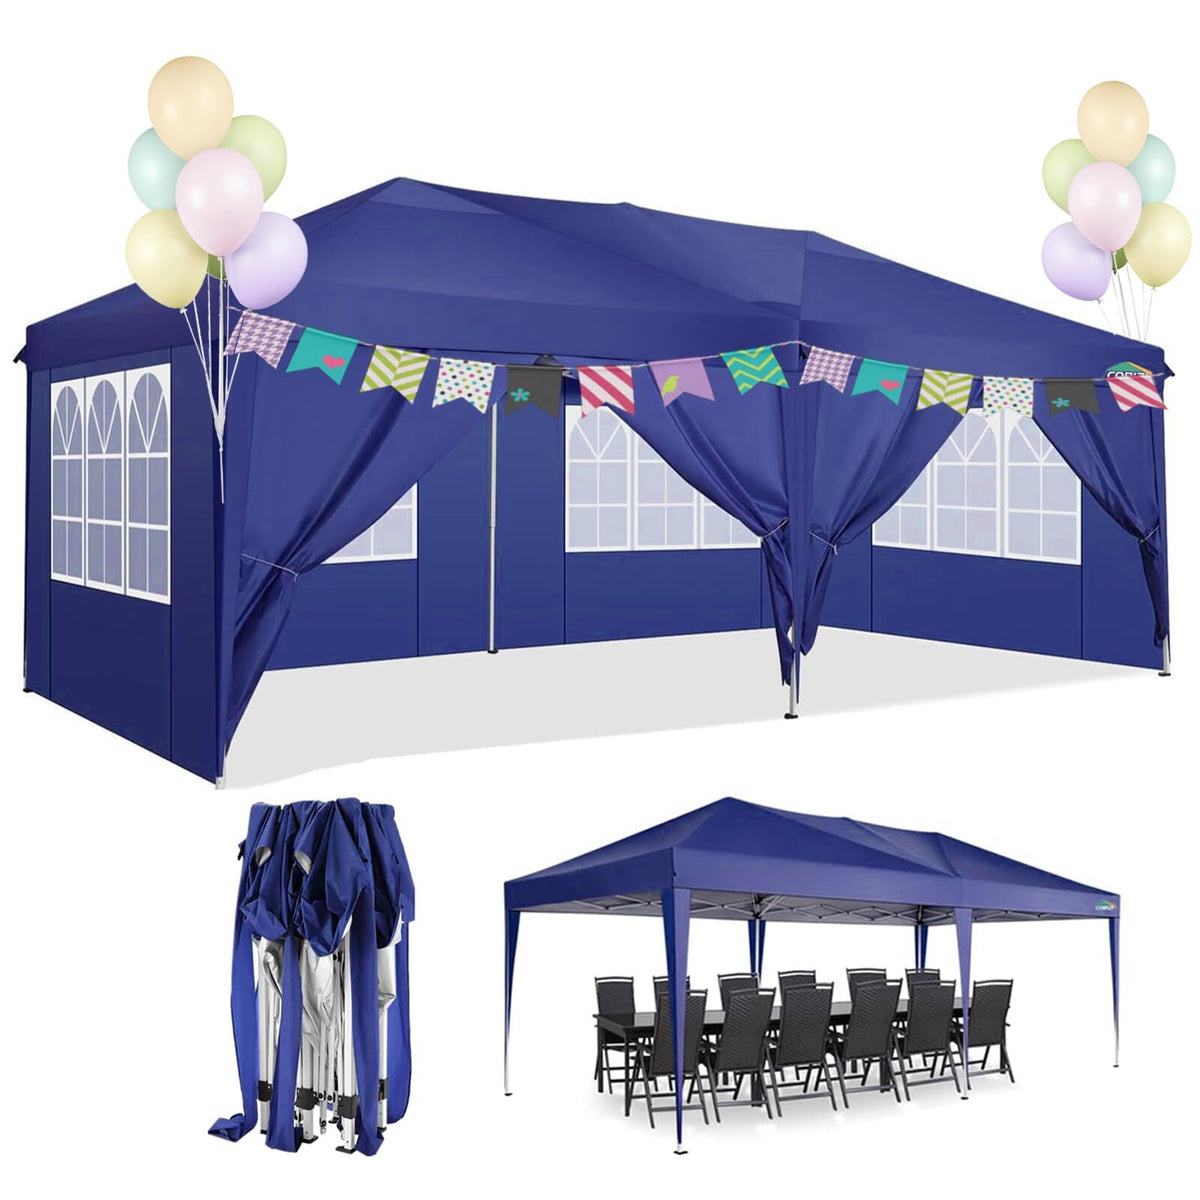 COBIZI 10x20 EZ Pop Up Canopy Tent Party Tent Outdoor Event Protable Instant Shelter Tent Gazebo with 6 Removable Sidewalls and Carry Bag,Dark Blue